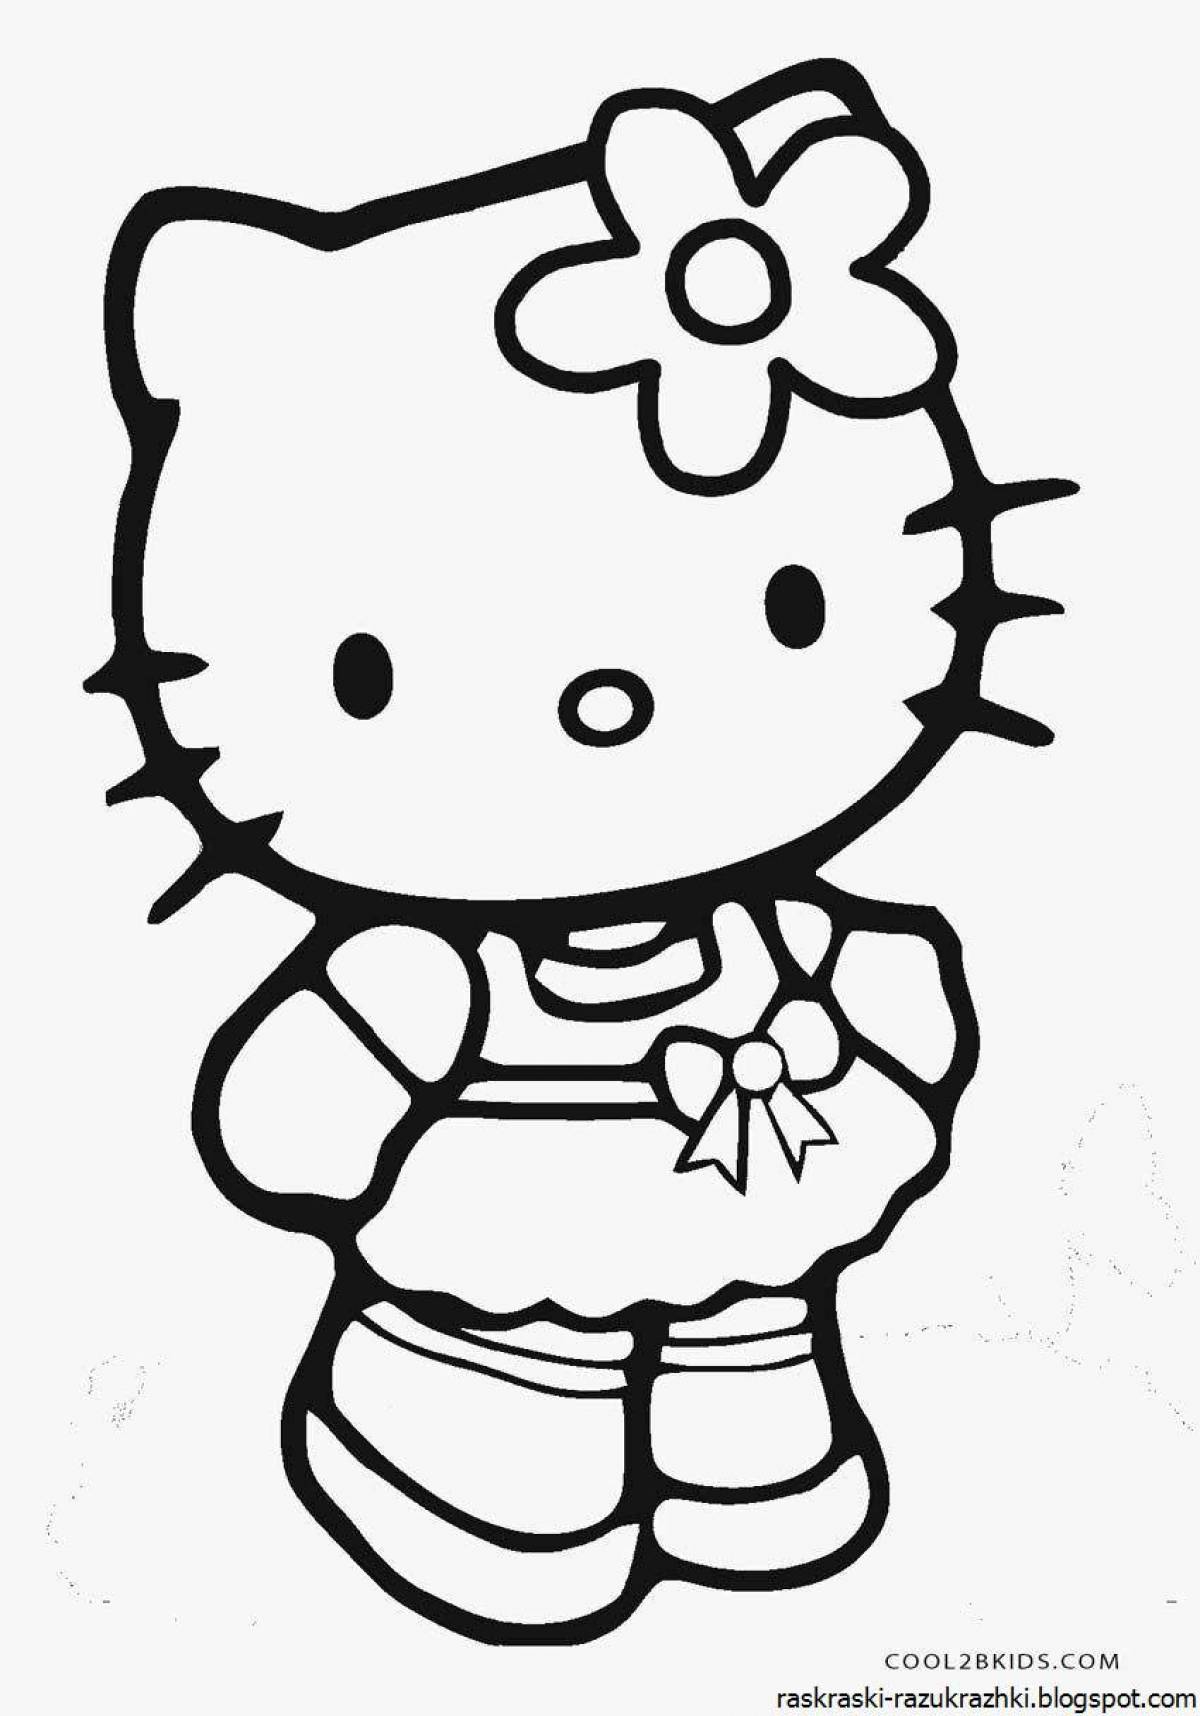 Coloring book hello kitty